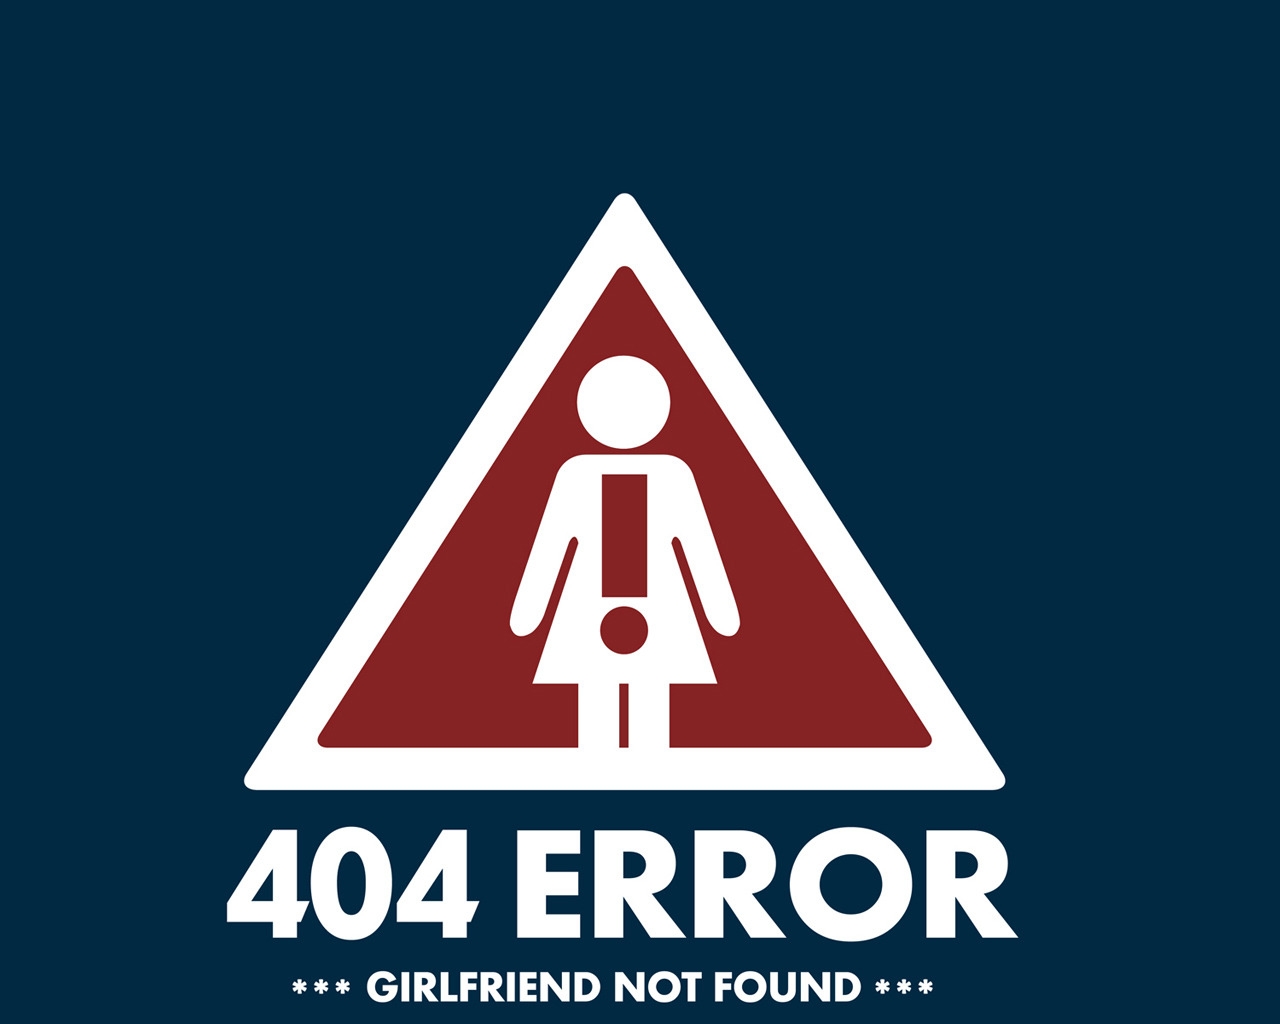 404 Error Page for 1280 x 1024 resolution